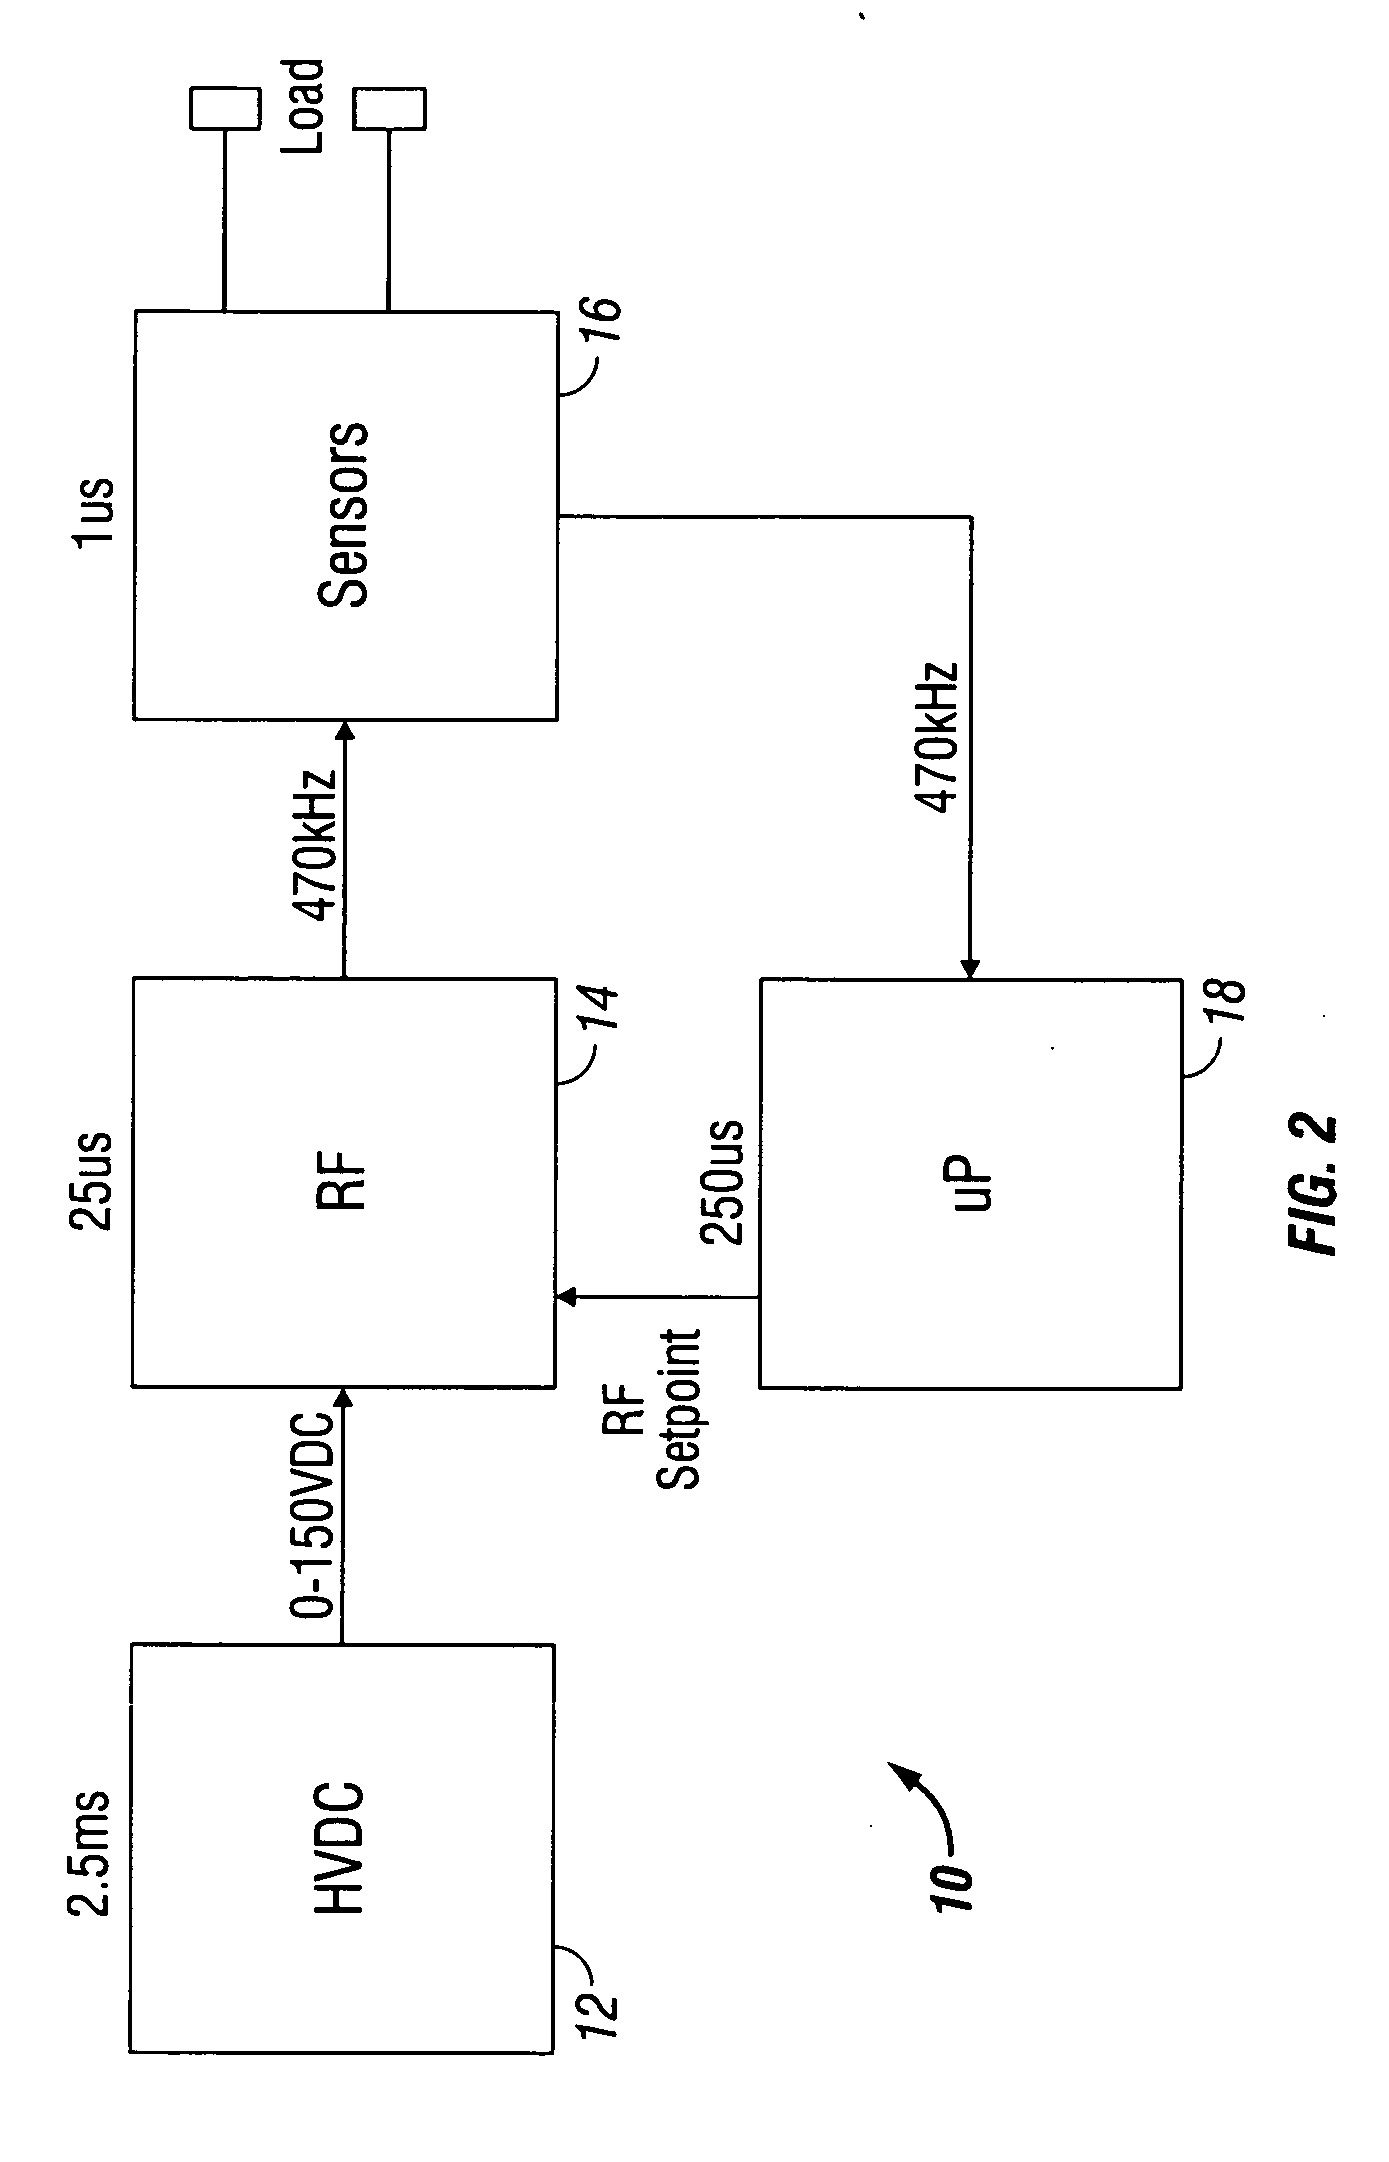 Circuit and method for controlling an electrosurgical generator using a full bridge topology